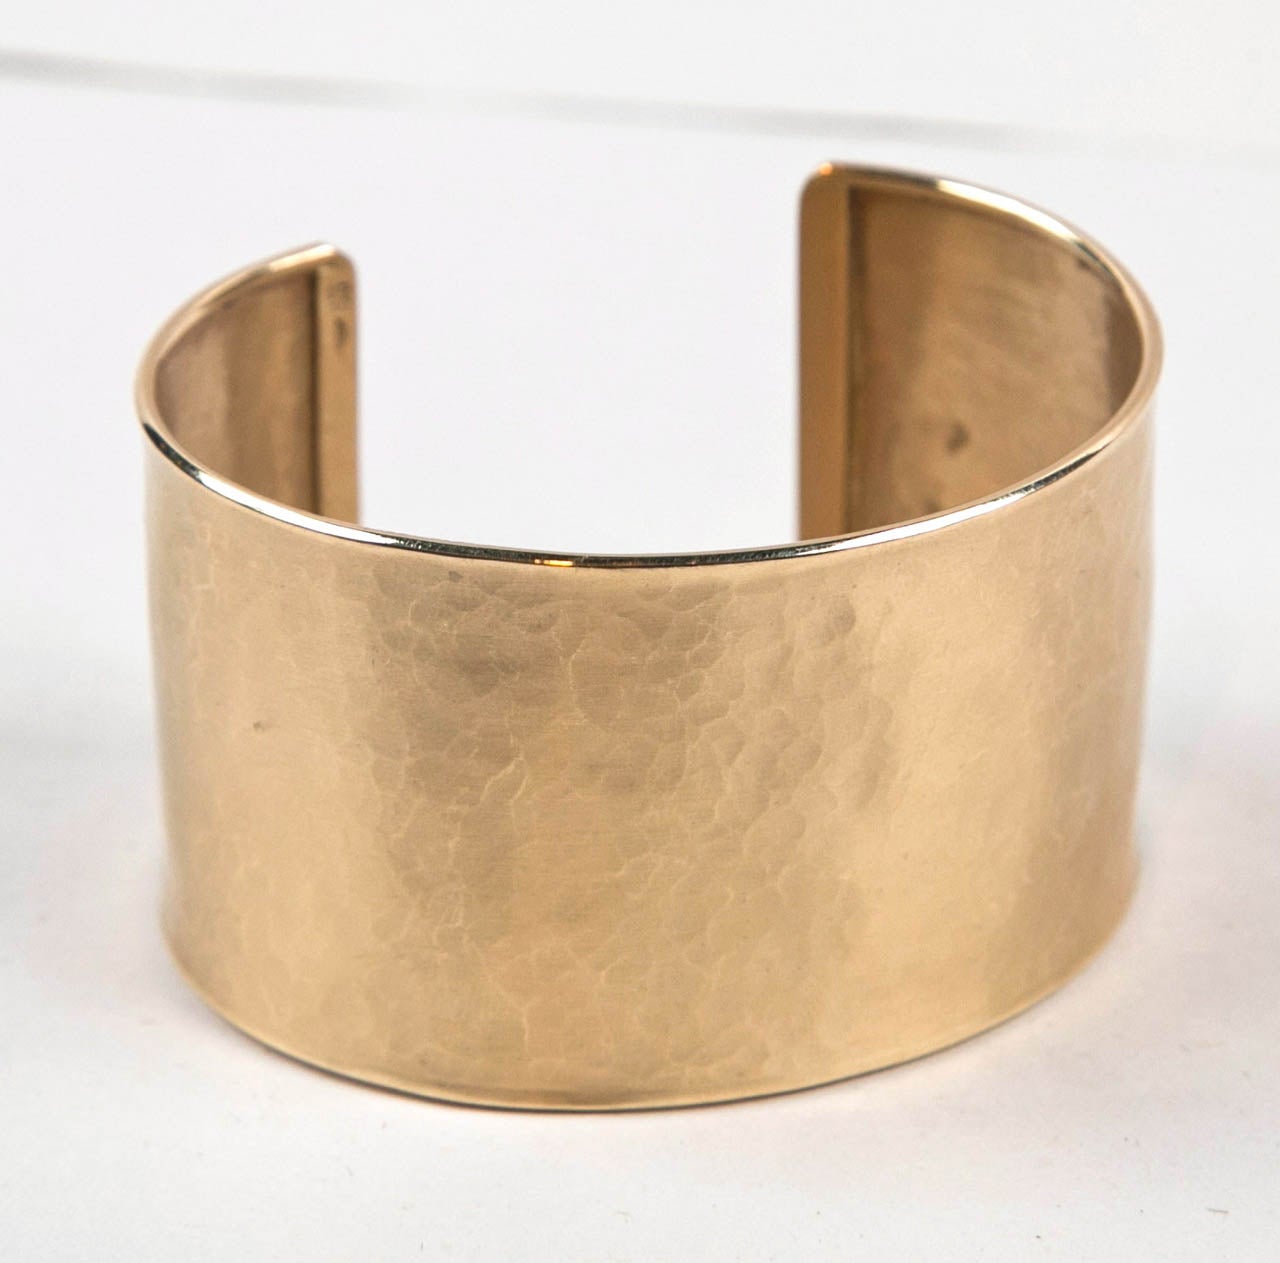 Handmade Pounded Gold Cuff Bracelet Presented by Jewelry and Such 1